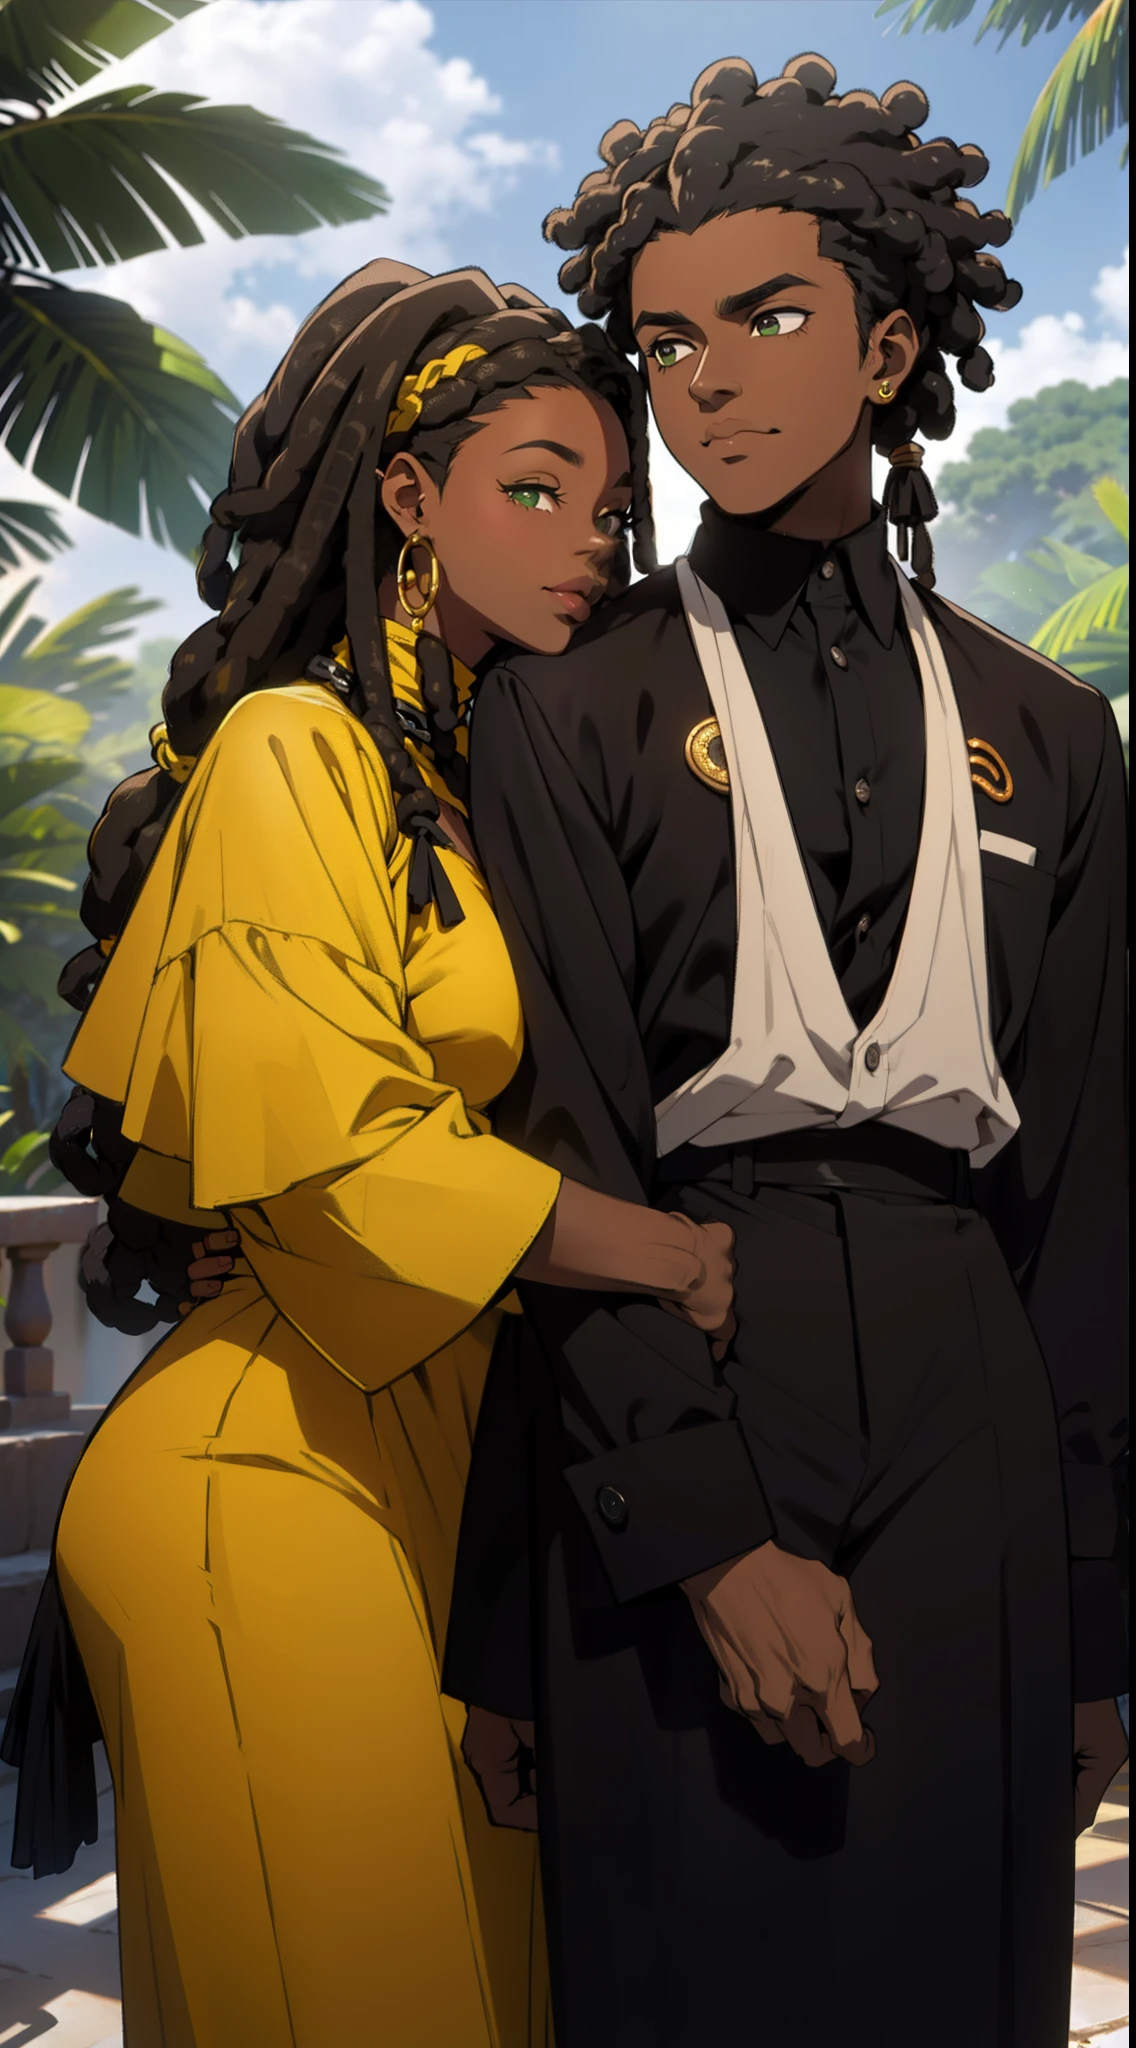 "Produce an anime-style image that celebrates love between black couples. The girl, skin black, skin black, skin black 1.5,  with black leather and thin African braids, it has ((greeneyes)) charming. Your partner, {dark-skinned and haired: 1,5}, ((Dreadlocks curtos)), has expressive white eyes. Both wear loose coats with gold details., adding a touch of sophistication. Set in a garden, the scene depicts passionate kisses between them. Convey the intensity of eternal love between these black lovers, highlighting their unique characteristics and the romantic connection they share. trench coat {((stylish sweaters, super trendy, super look))}".